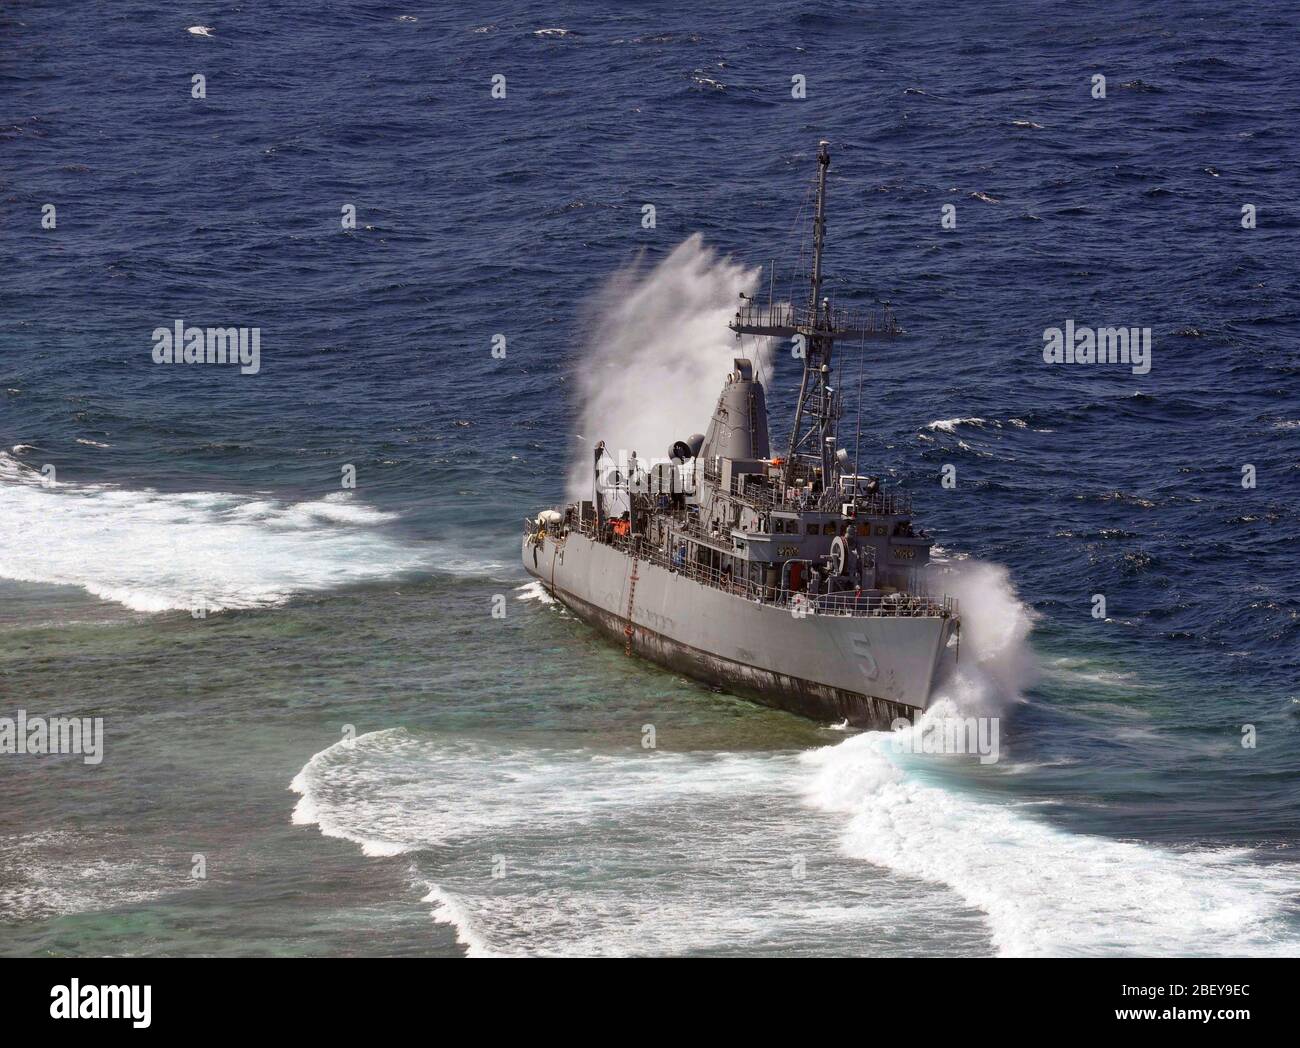 SULU SEA (Jan. 29, 2013) Heavy waves crash against the grounded mine countermeasure ship USS Guardian (MCM 5), which ran aground on the Tubbataha Reef in the Sulu Sea on Jan. 17. The grounding and subsequent heavy waves constantly hitting Guardian have caused severe damage, leading the Navy to determine the 23-year old ship is beyond economical repair and is a complete loss. With the deteriorating integrity of the ship, the weight involved, and where it has grounded on the reef, dismantling the ship in sections is the only supportable salvage option. The U.S. Navy continues to work in close co Stock Photo